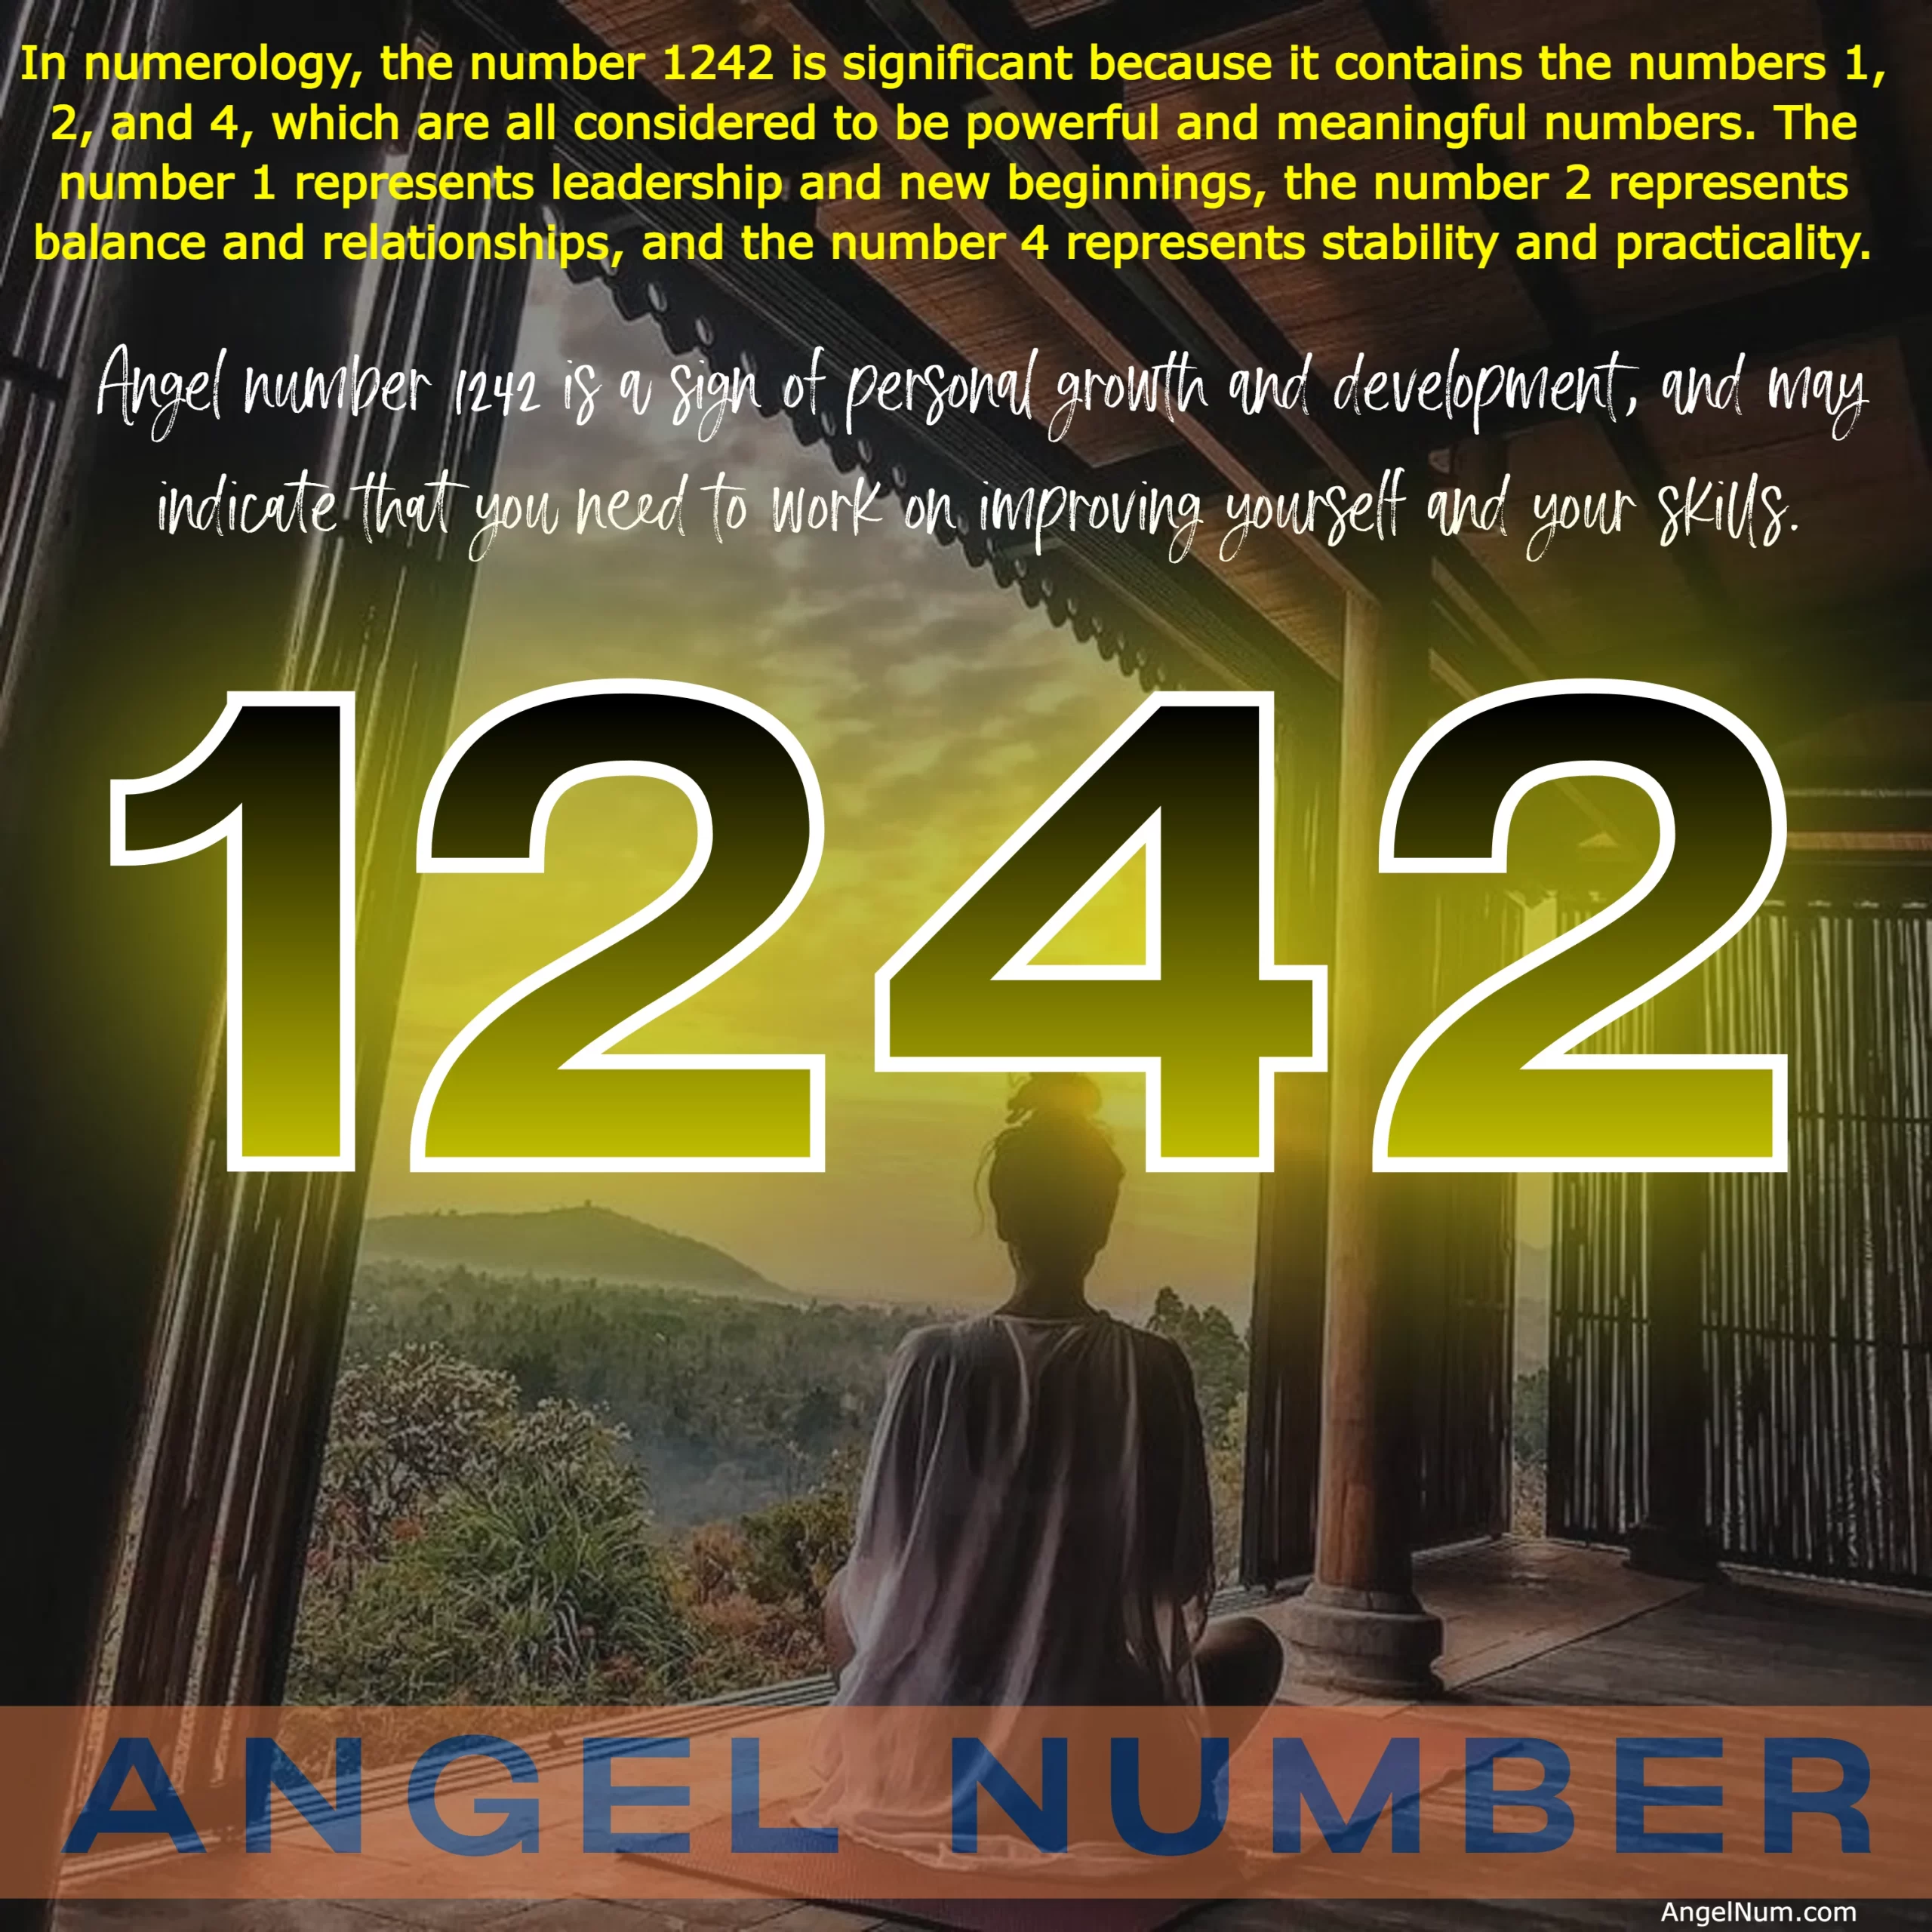 Angel Number 1242: Meaning, Symbolism, and Significance